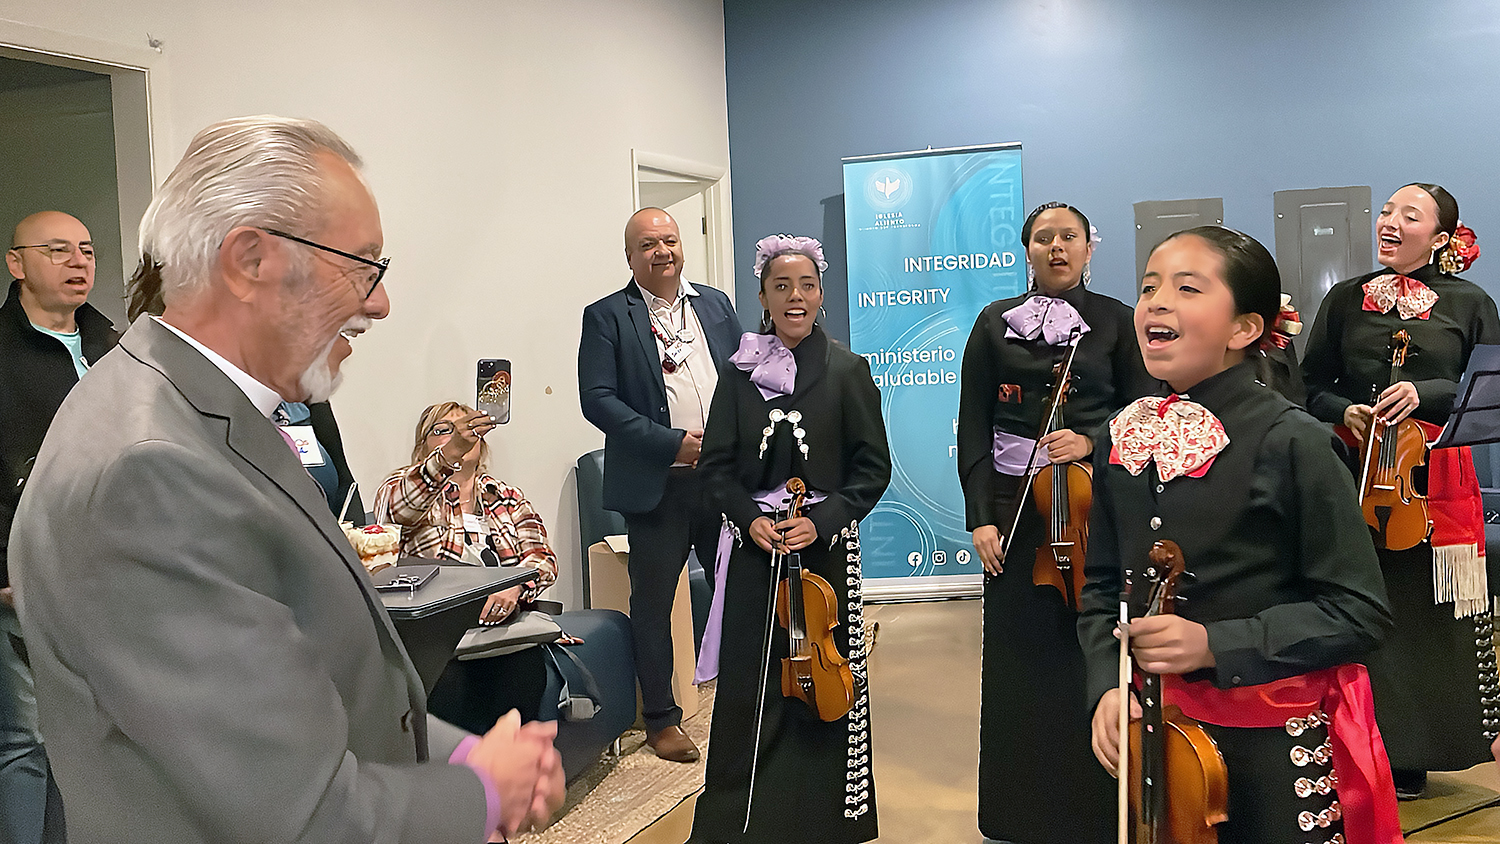 Retired Bishop Elías Galván, the first Hispanic/Latino to be elected bishop of The United Methodist Church, receives a surprise greeting from a mariachi, upon his arrival at First United Methodist Church of Phoenix. Photo by the Rev. Gustavo Vasquez, UM News.